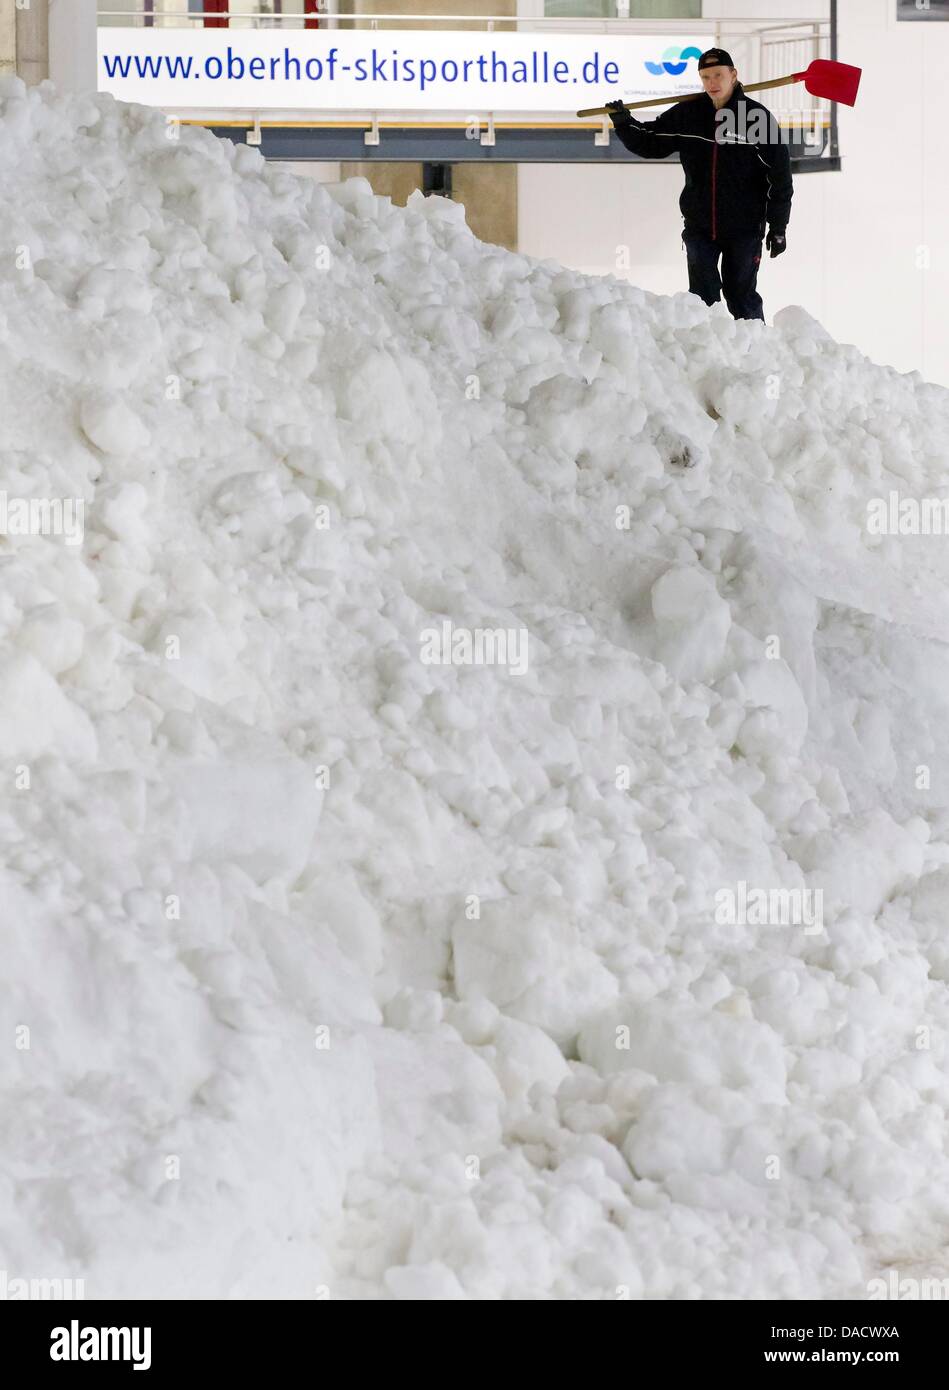 A technician works next to 1000 cubic meters of crushed ice at a ski sport venue in Oberhof, Germany, 19 December 2011. The ice is supposed to be used for the Tour de Ski on 29 and 30 December 2011 an dthe Biathlon World Cup on 4 - 8 January 2012 in Oberhof. Photo: MICHAEL REICHEL Stock Photo